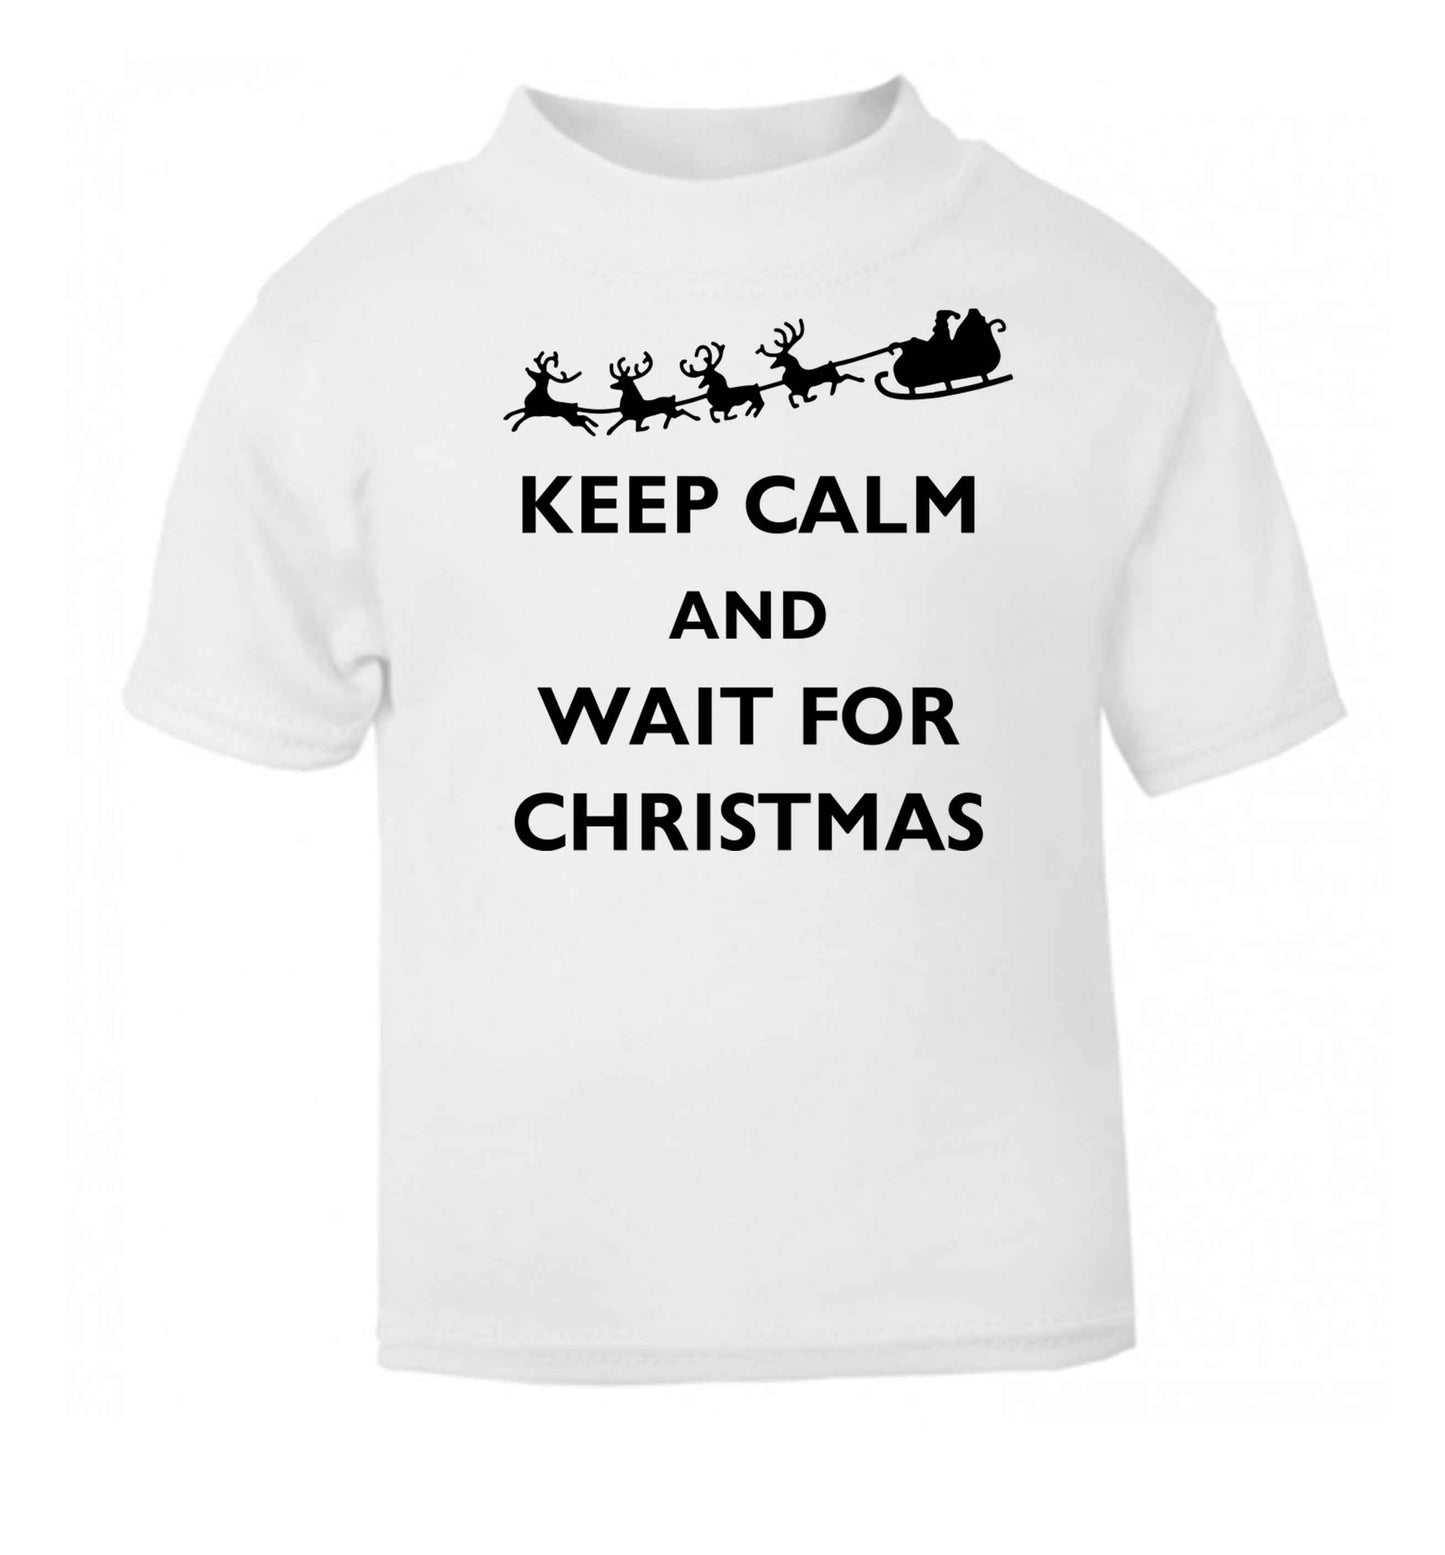 Keep calm and wait for Christmas white baby toddler Tshirt 2 Years